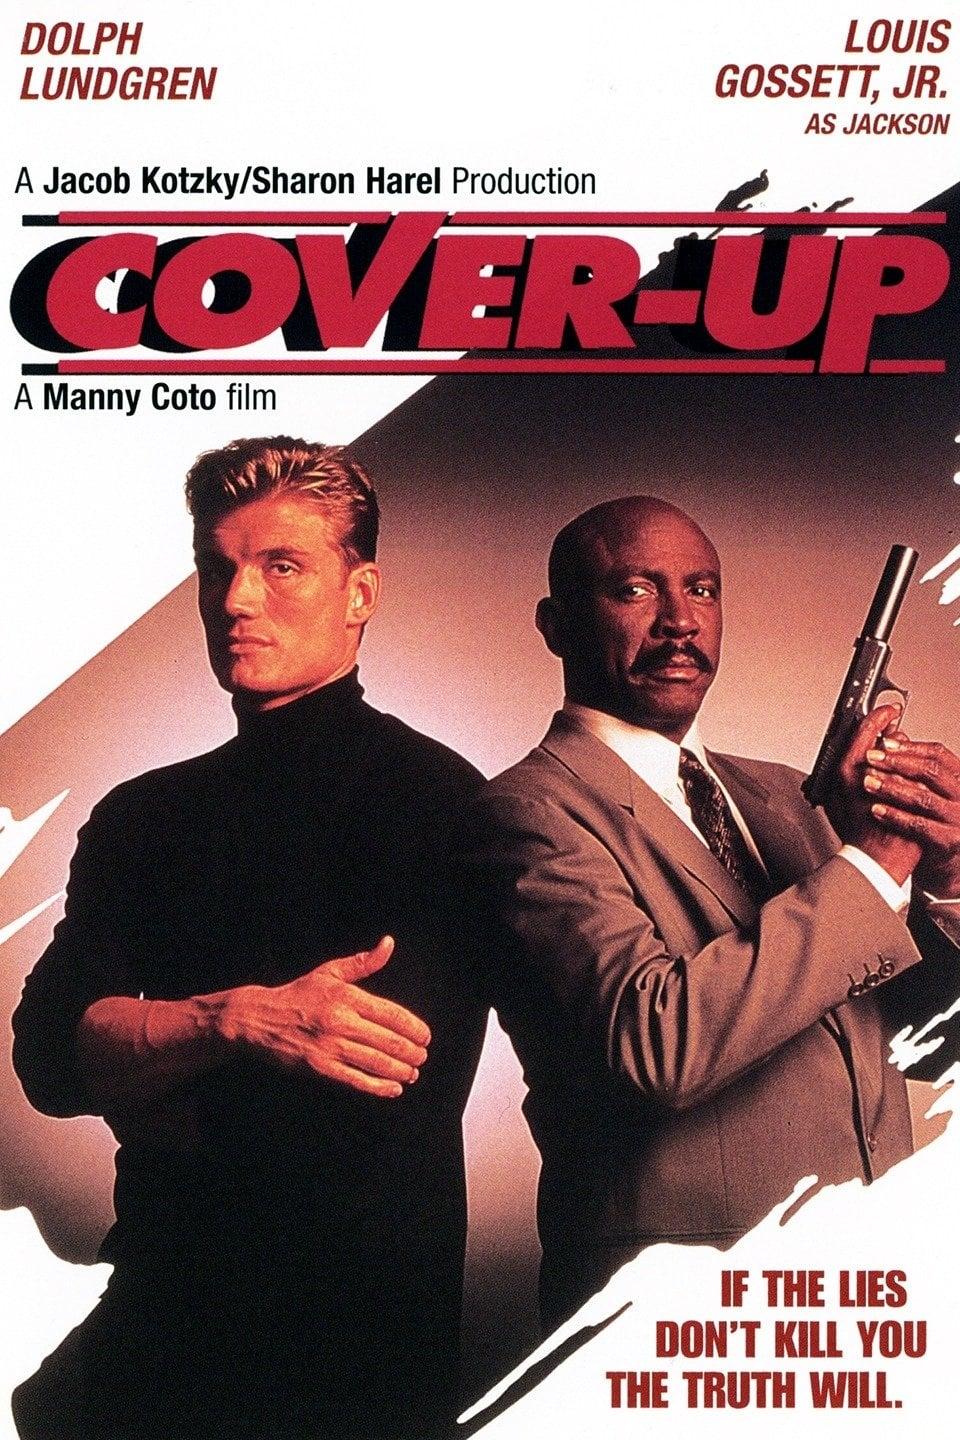 Cover-Up poster